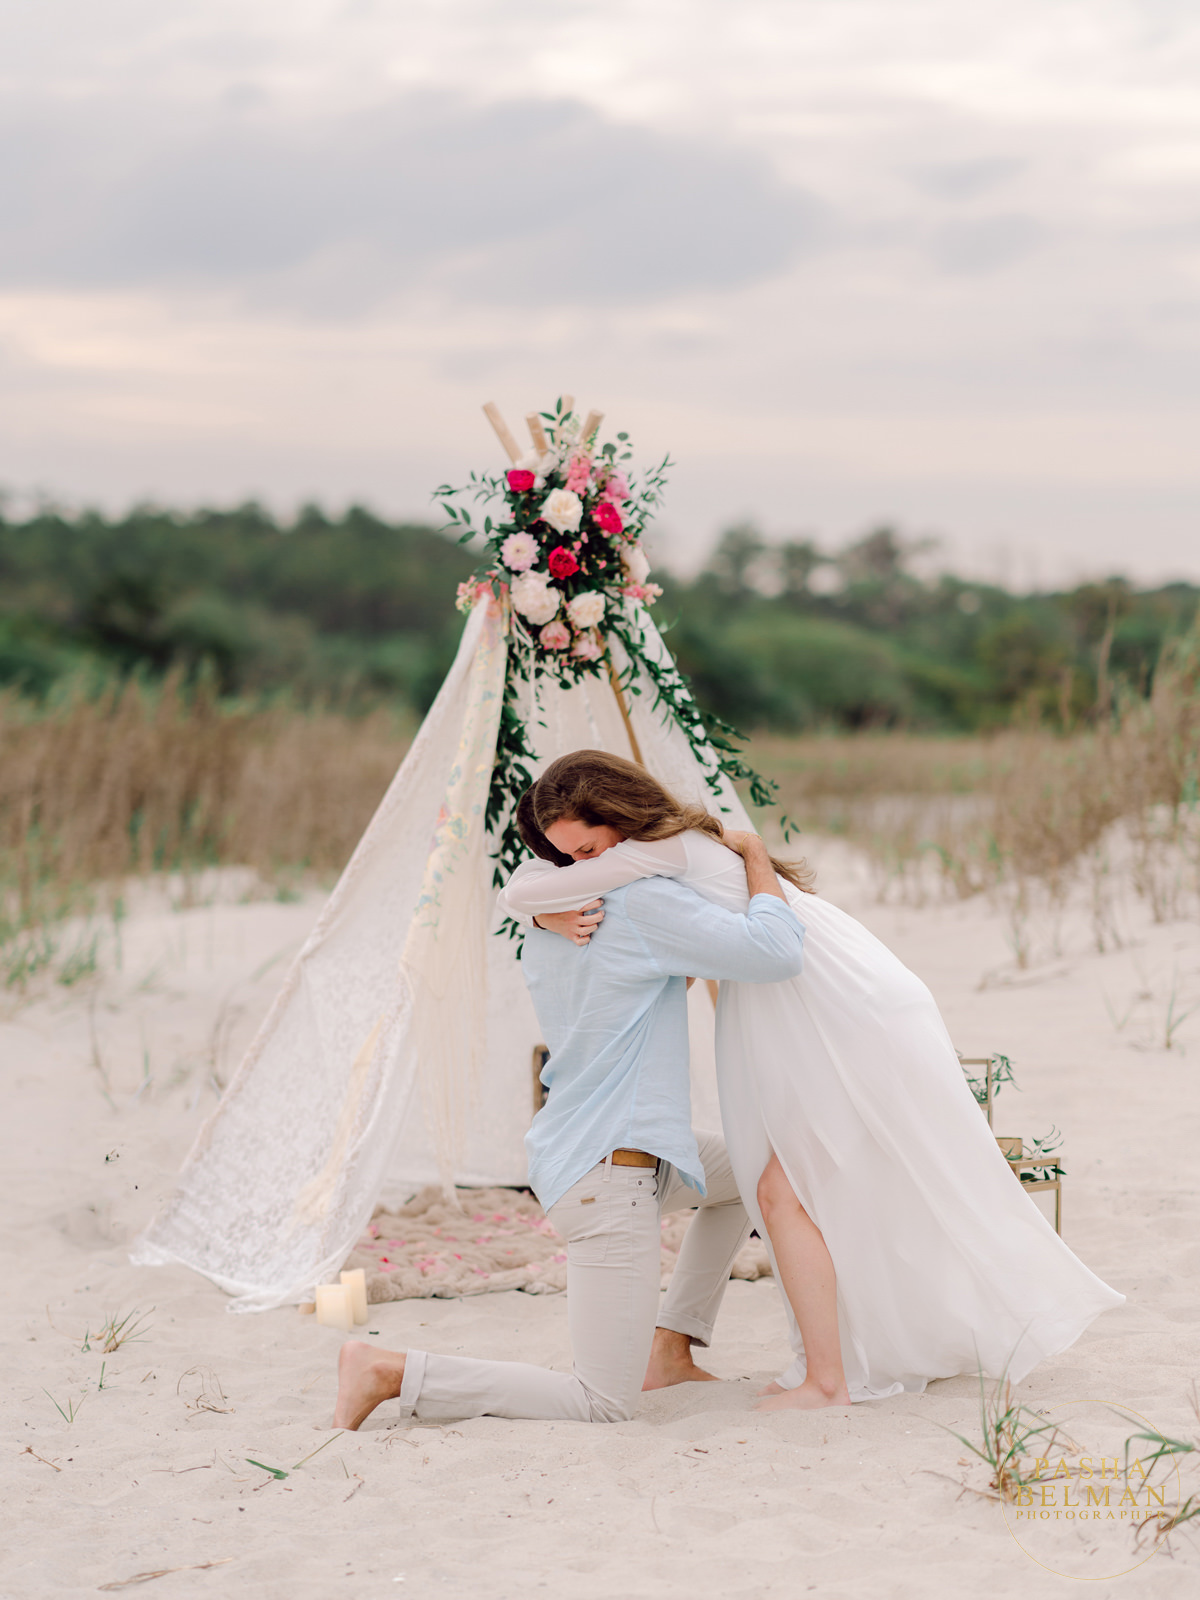 Marriage Proposals in Myrtle Beach and Pawleys Island by Top Wedding Photographer